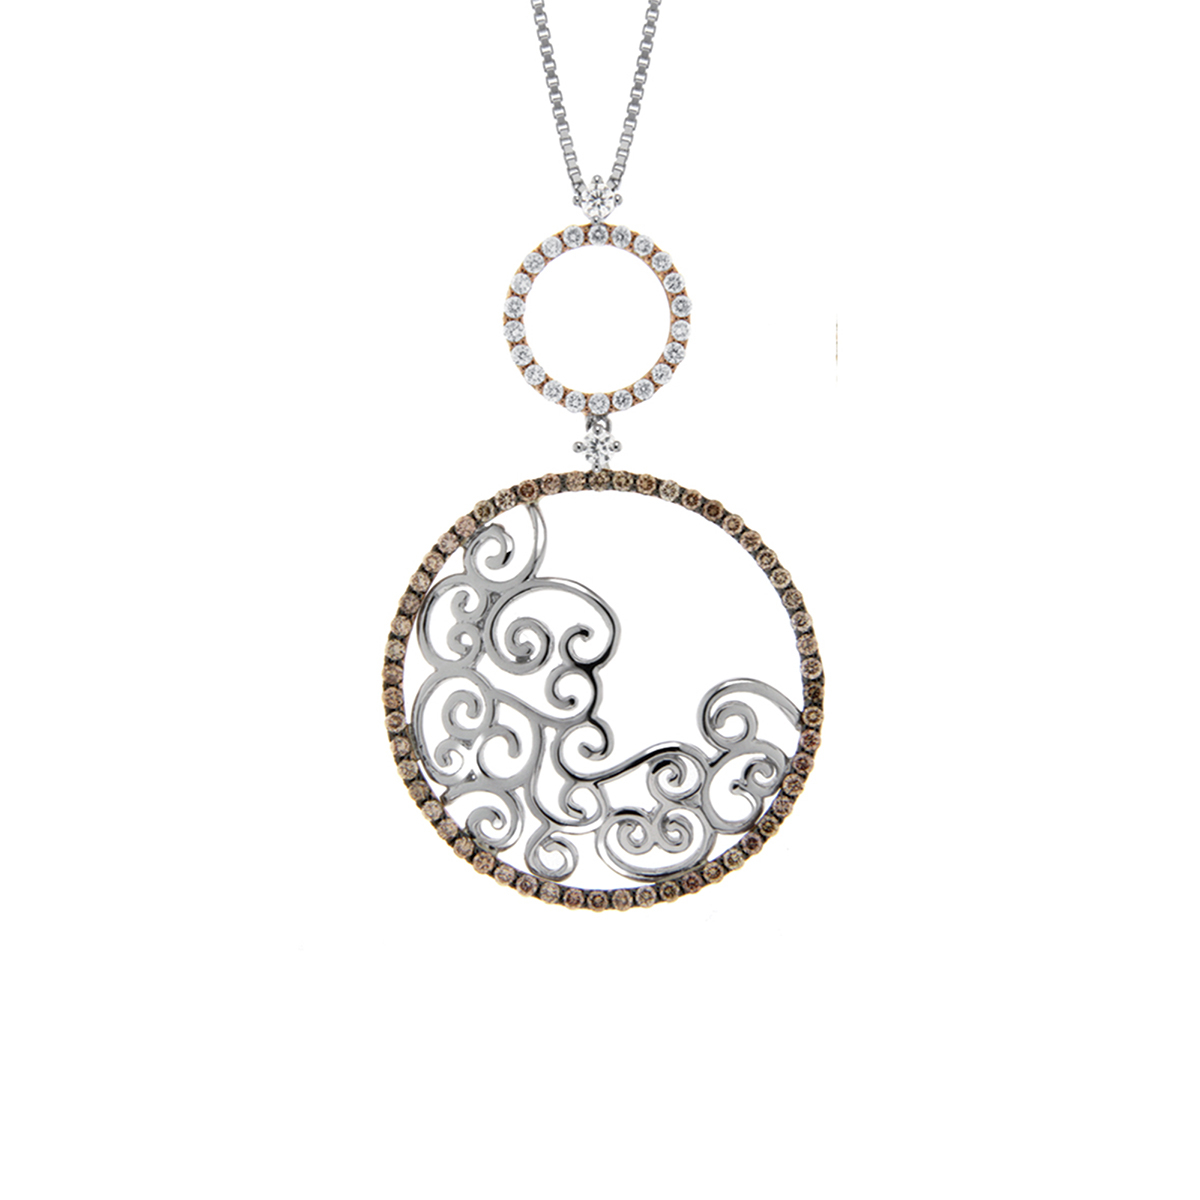 18 K Rose and White Gold Twirl Circle Pendant Necklace with White and Brown Diamonds